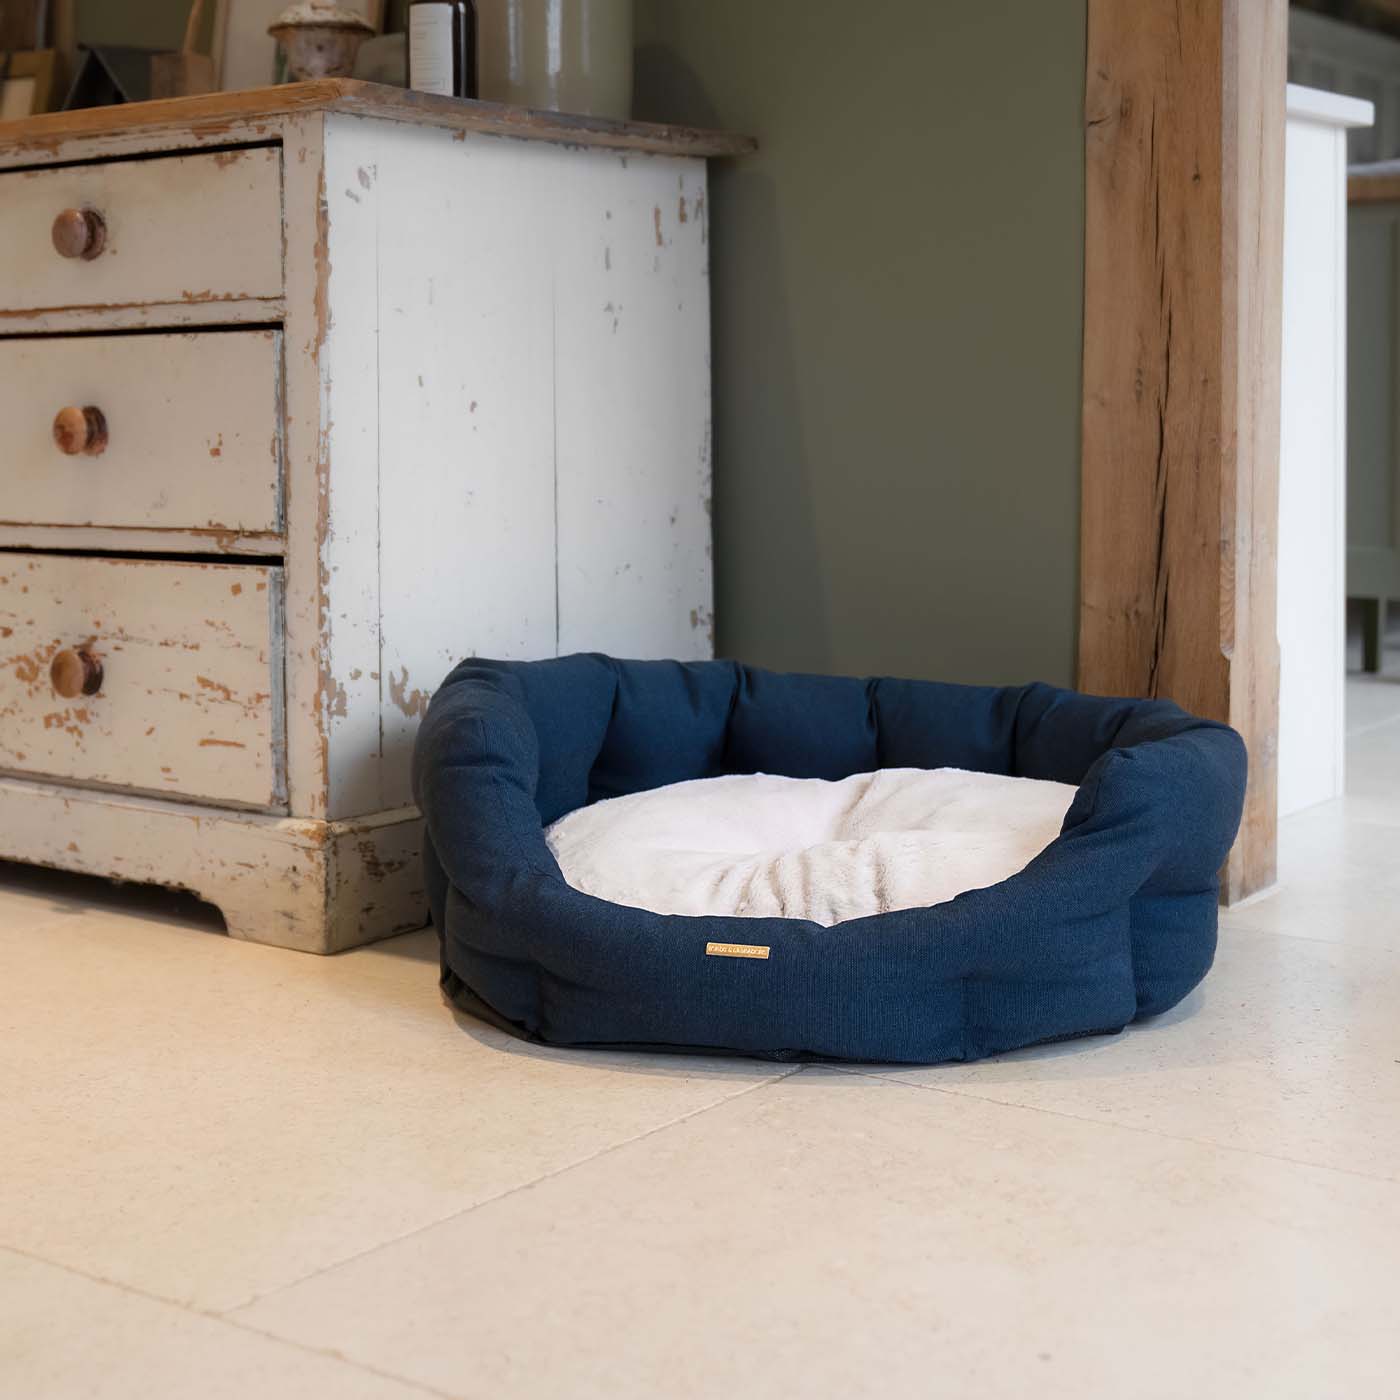 Discover our luxury twill oval dog bed in beautiful Denim, the ideal choice for dogs to enjoy blissful nap-time, featuring reversible inner cushion with raised sides for dogs who love to rest their head for the ultimate cosiness! Handcrafted in Italy for pure pet luxury! Available now at Lords & Labradors 